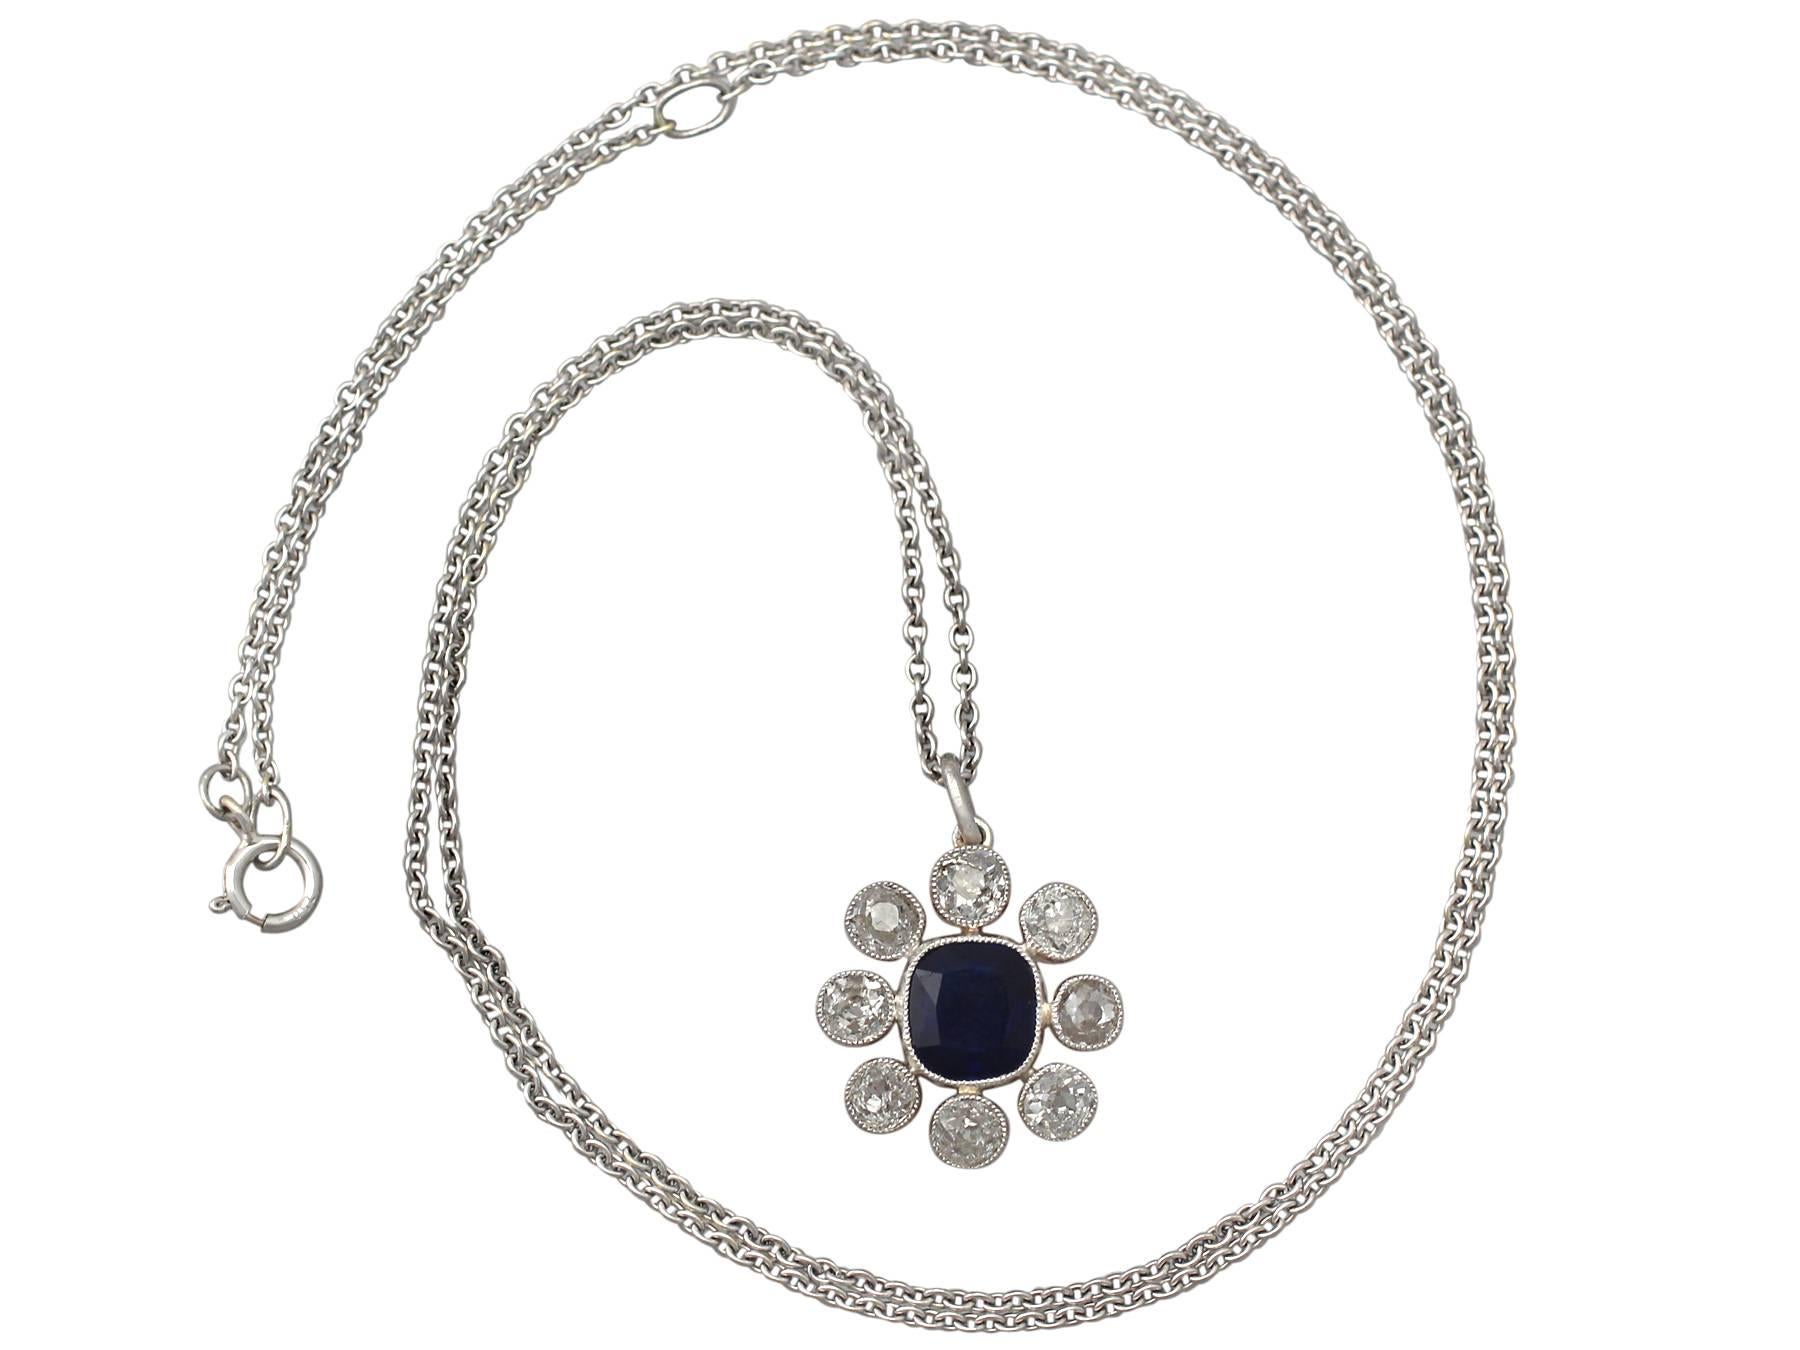 A stunning, fine and impressive antique 0.95 carat natural blue sapphire and 0.90 carat diamond, 15 karat yellow gold and platinum set pendant; part of our antique jewelry and estate jewelry collections

This stunning, fine and impressive sapphire